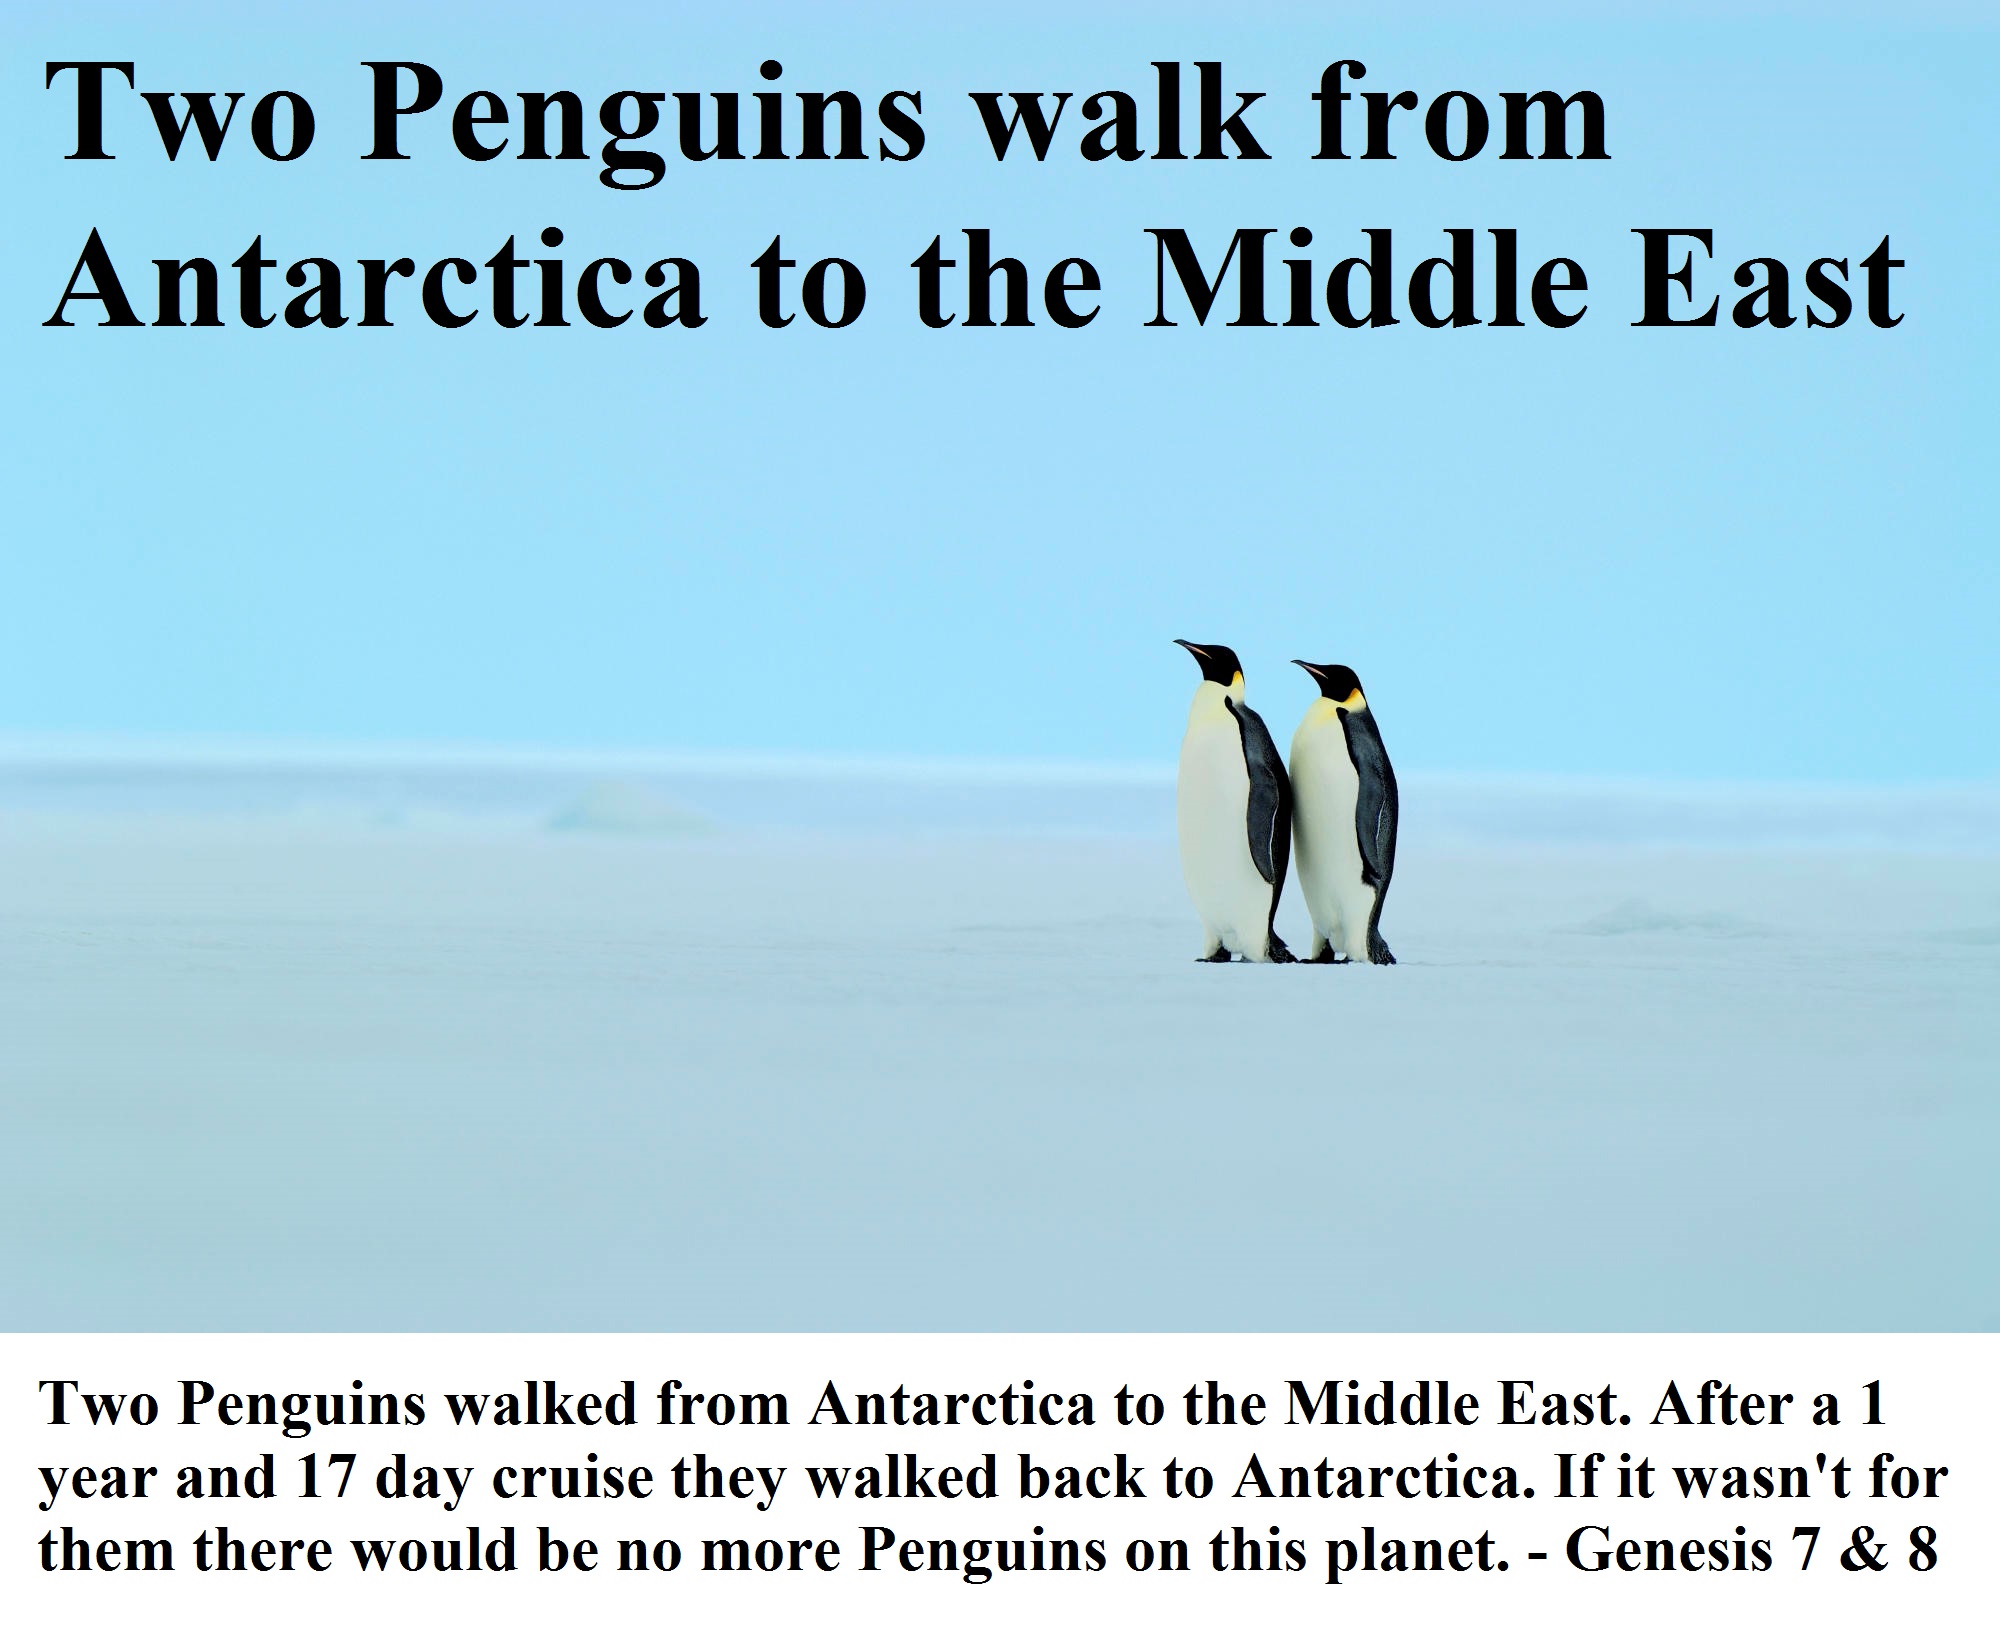 Two Penguins walked from Antarctica to the Middle East. After their 1 year and 17 day cruise they walked back to Antarctica. If it wasn't for them there would be no more Penguins on this planet. - Genesis 7 & 8 